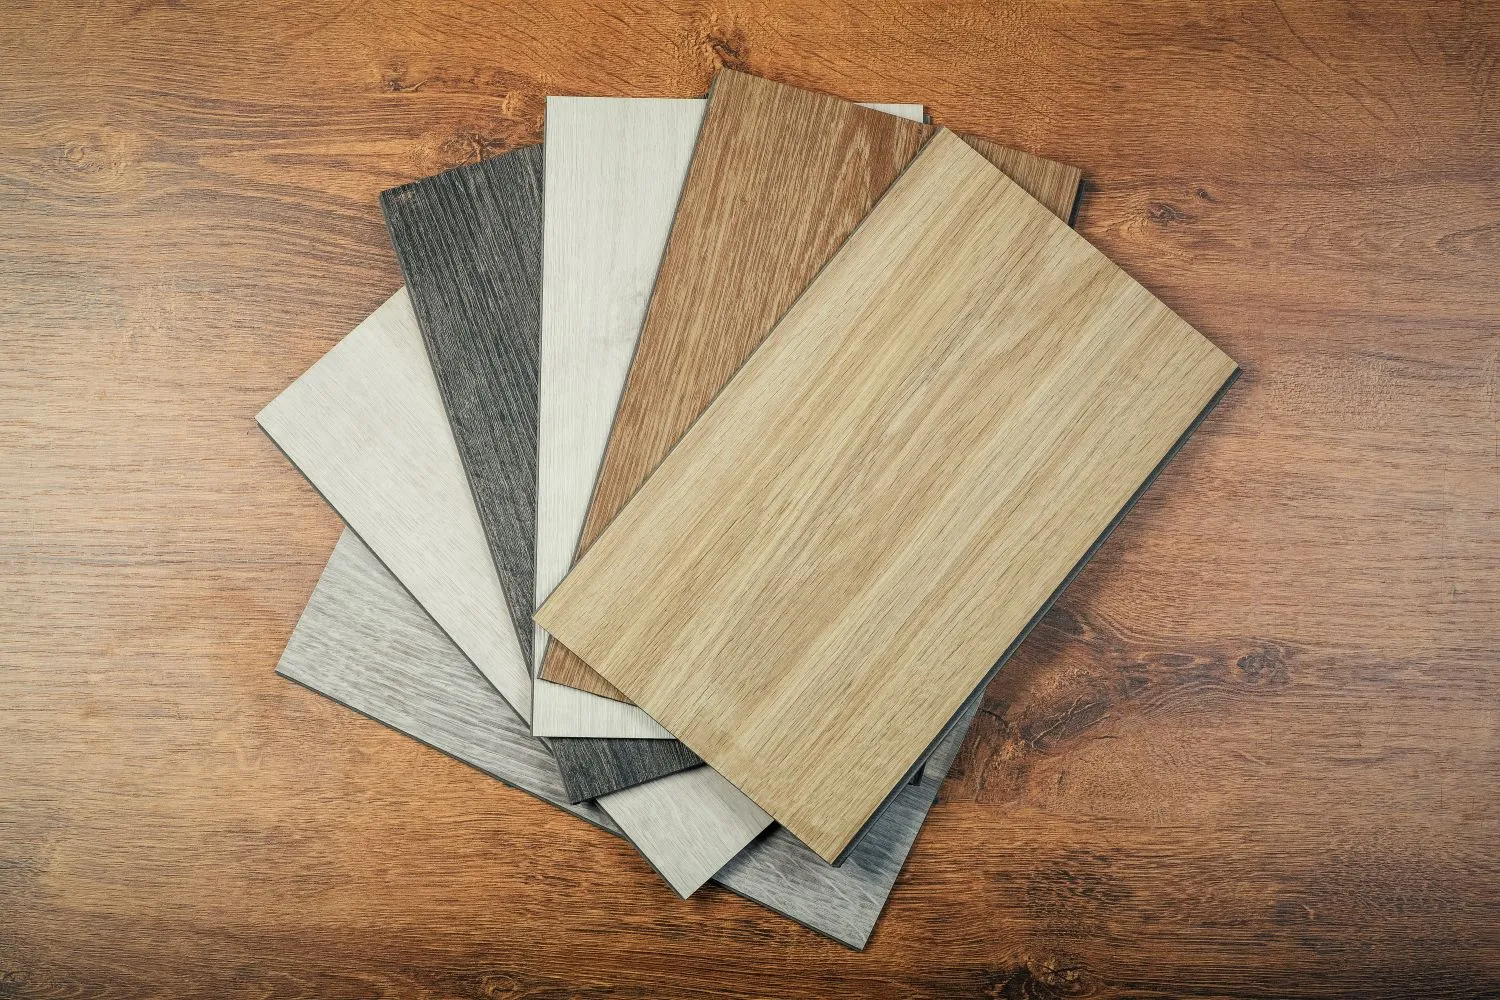 Vinyl flooring is the perfect solution to save money,